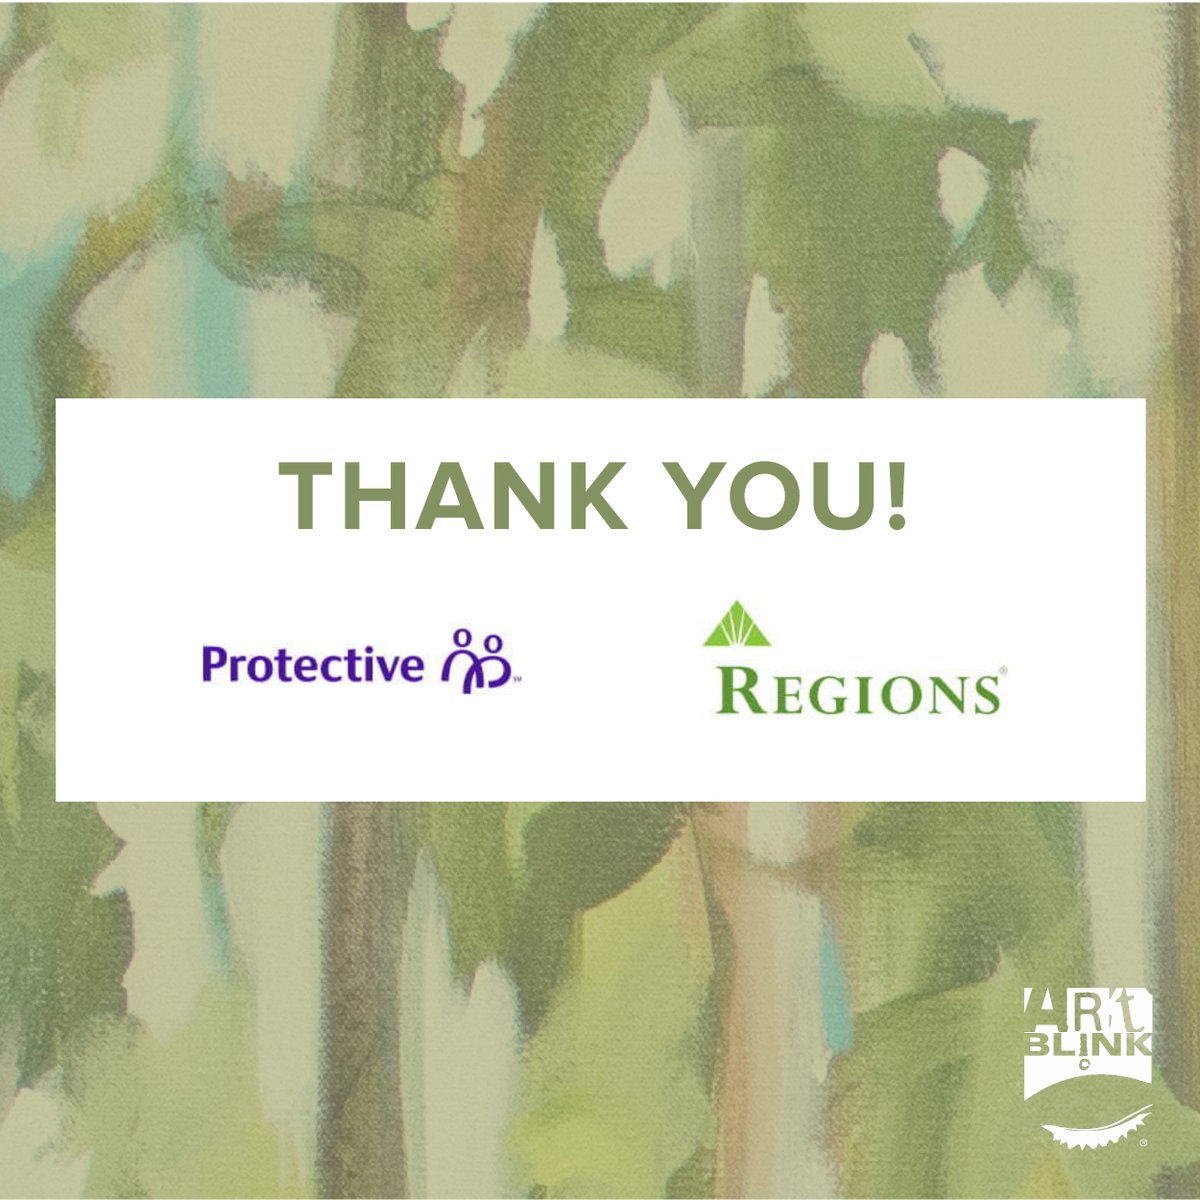 Thank you @ProtectiveLife and @RegionsBank for partnering with us to present #ArtBLINK2023. 

Your support allows the Cancer Center to further its understanding of cancer to improve prevention, detection, treatment and survivorship for all people.